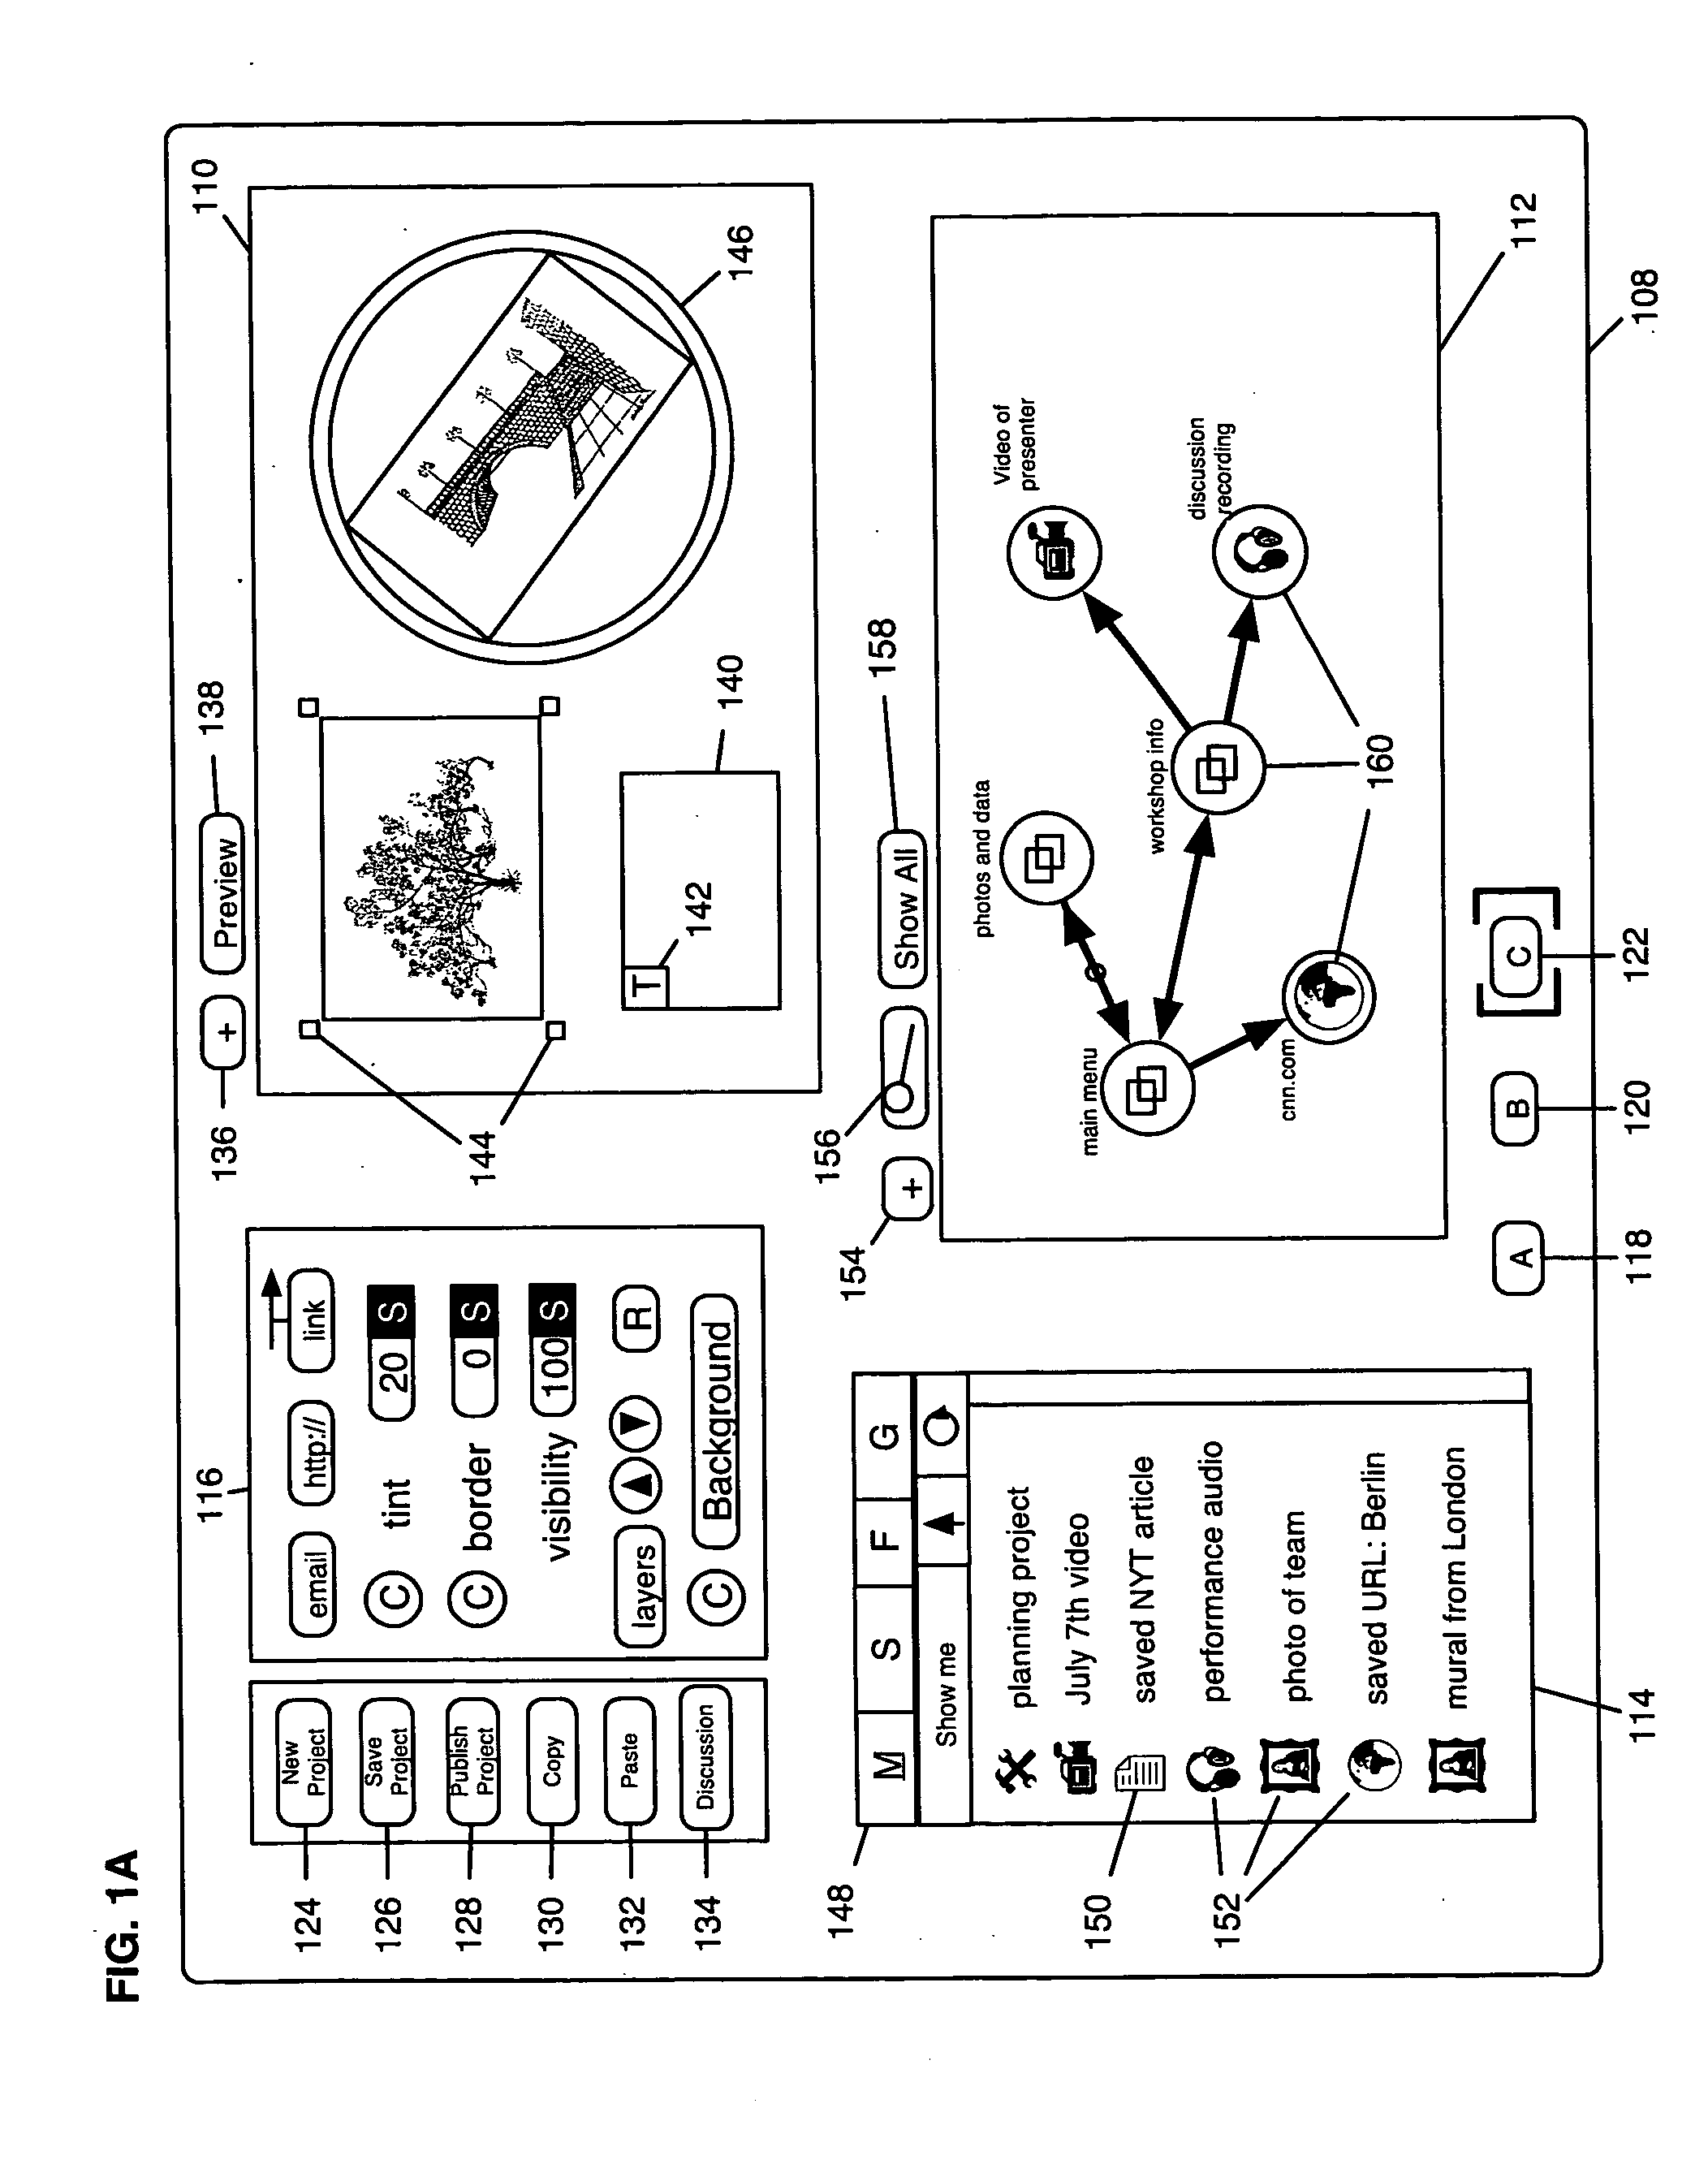 Apparatus and method for creating and using documents in a distributed computing network